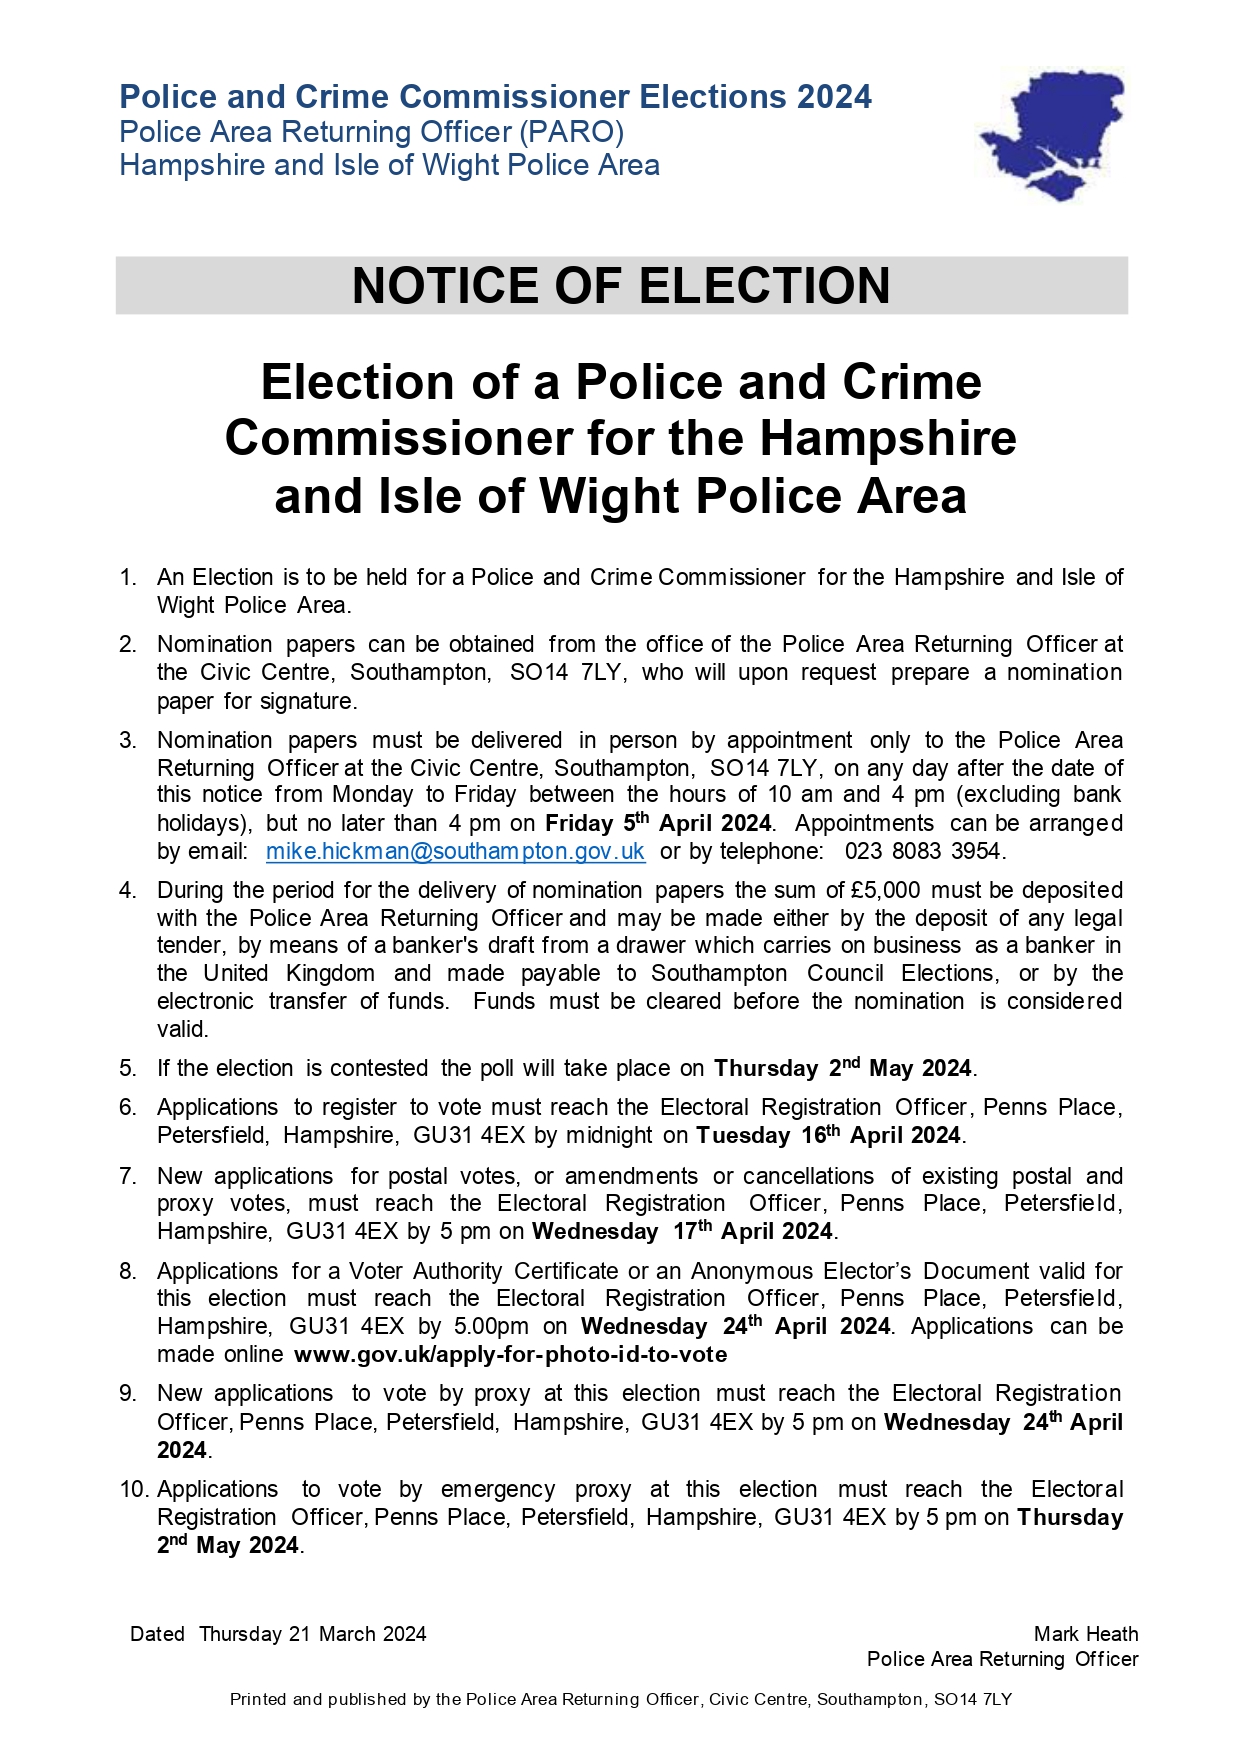 Election of a Police and Crime Commissioner